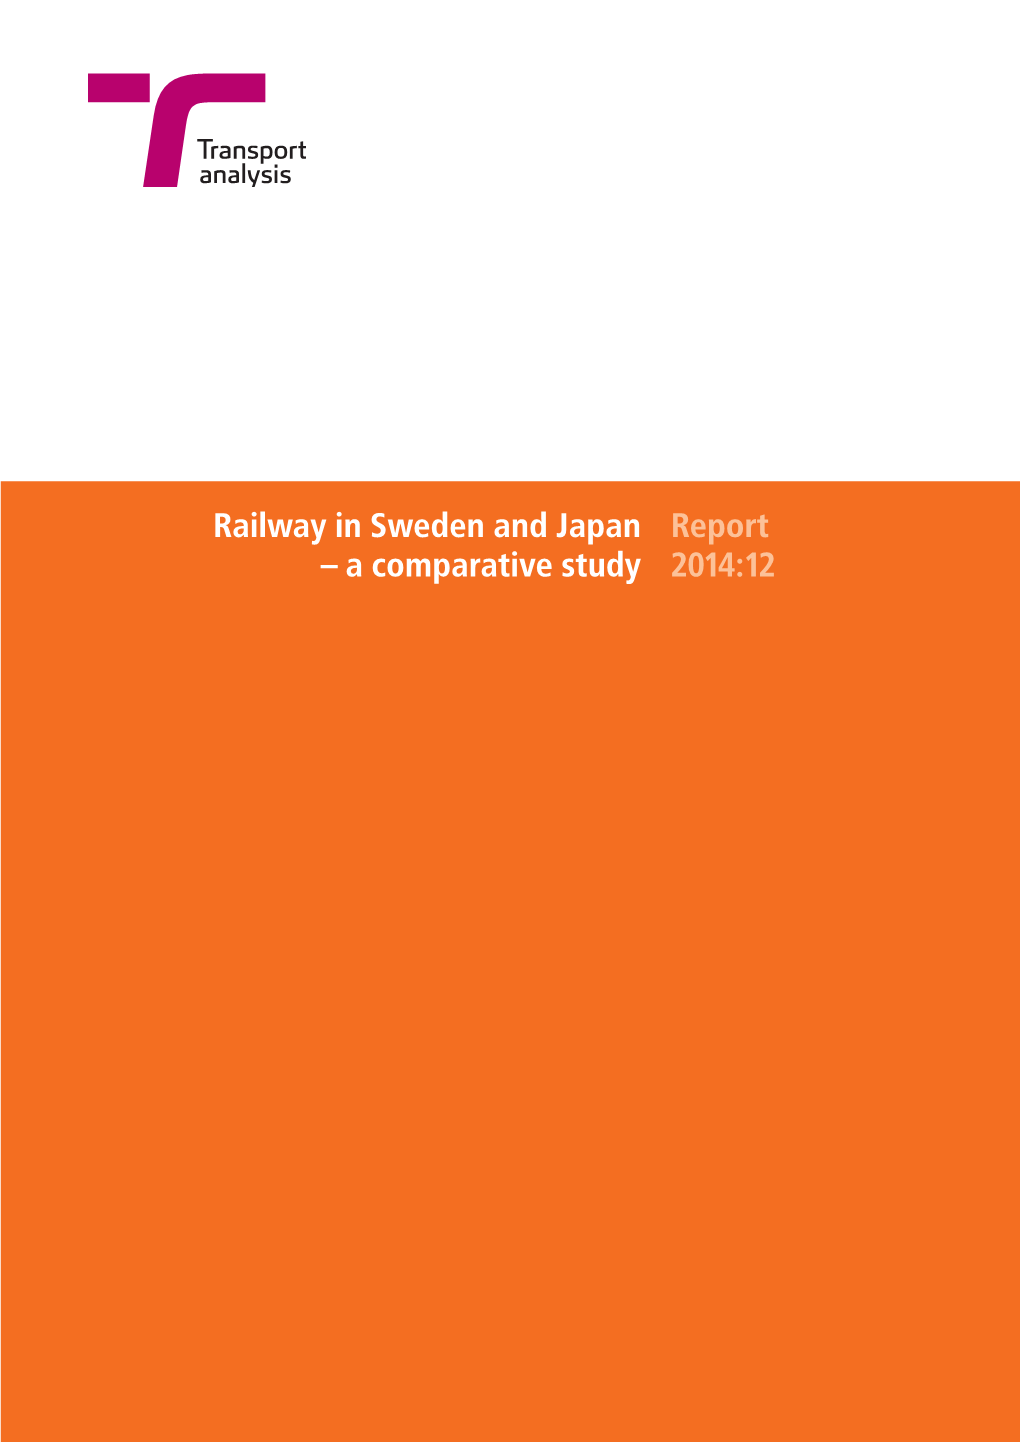 Railway in Sweden and Japan – a Comparative Study Report 2014:12